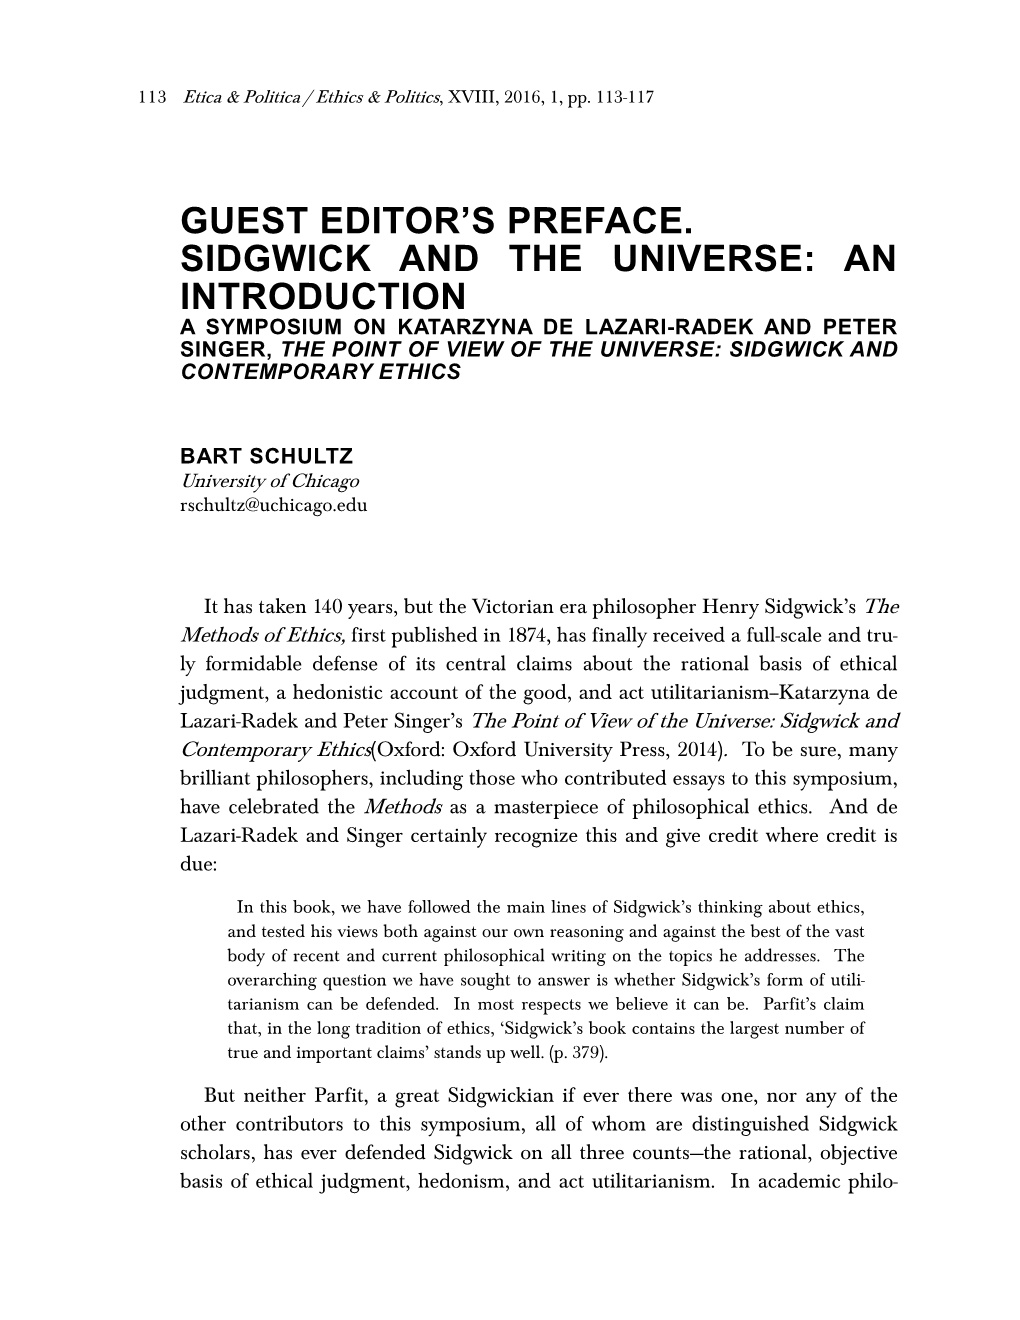 Guest Editor's Preface. Sidgwick and the Universe